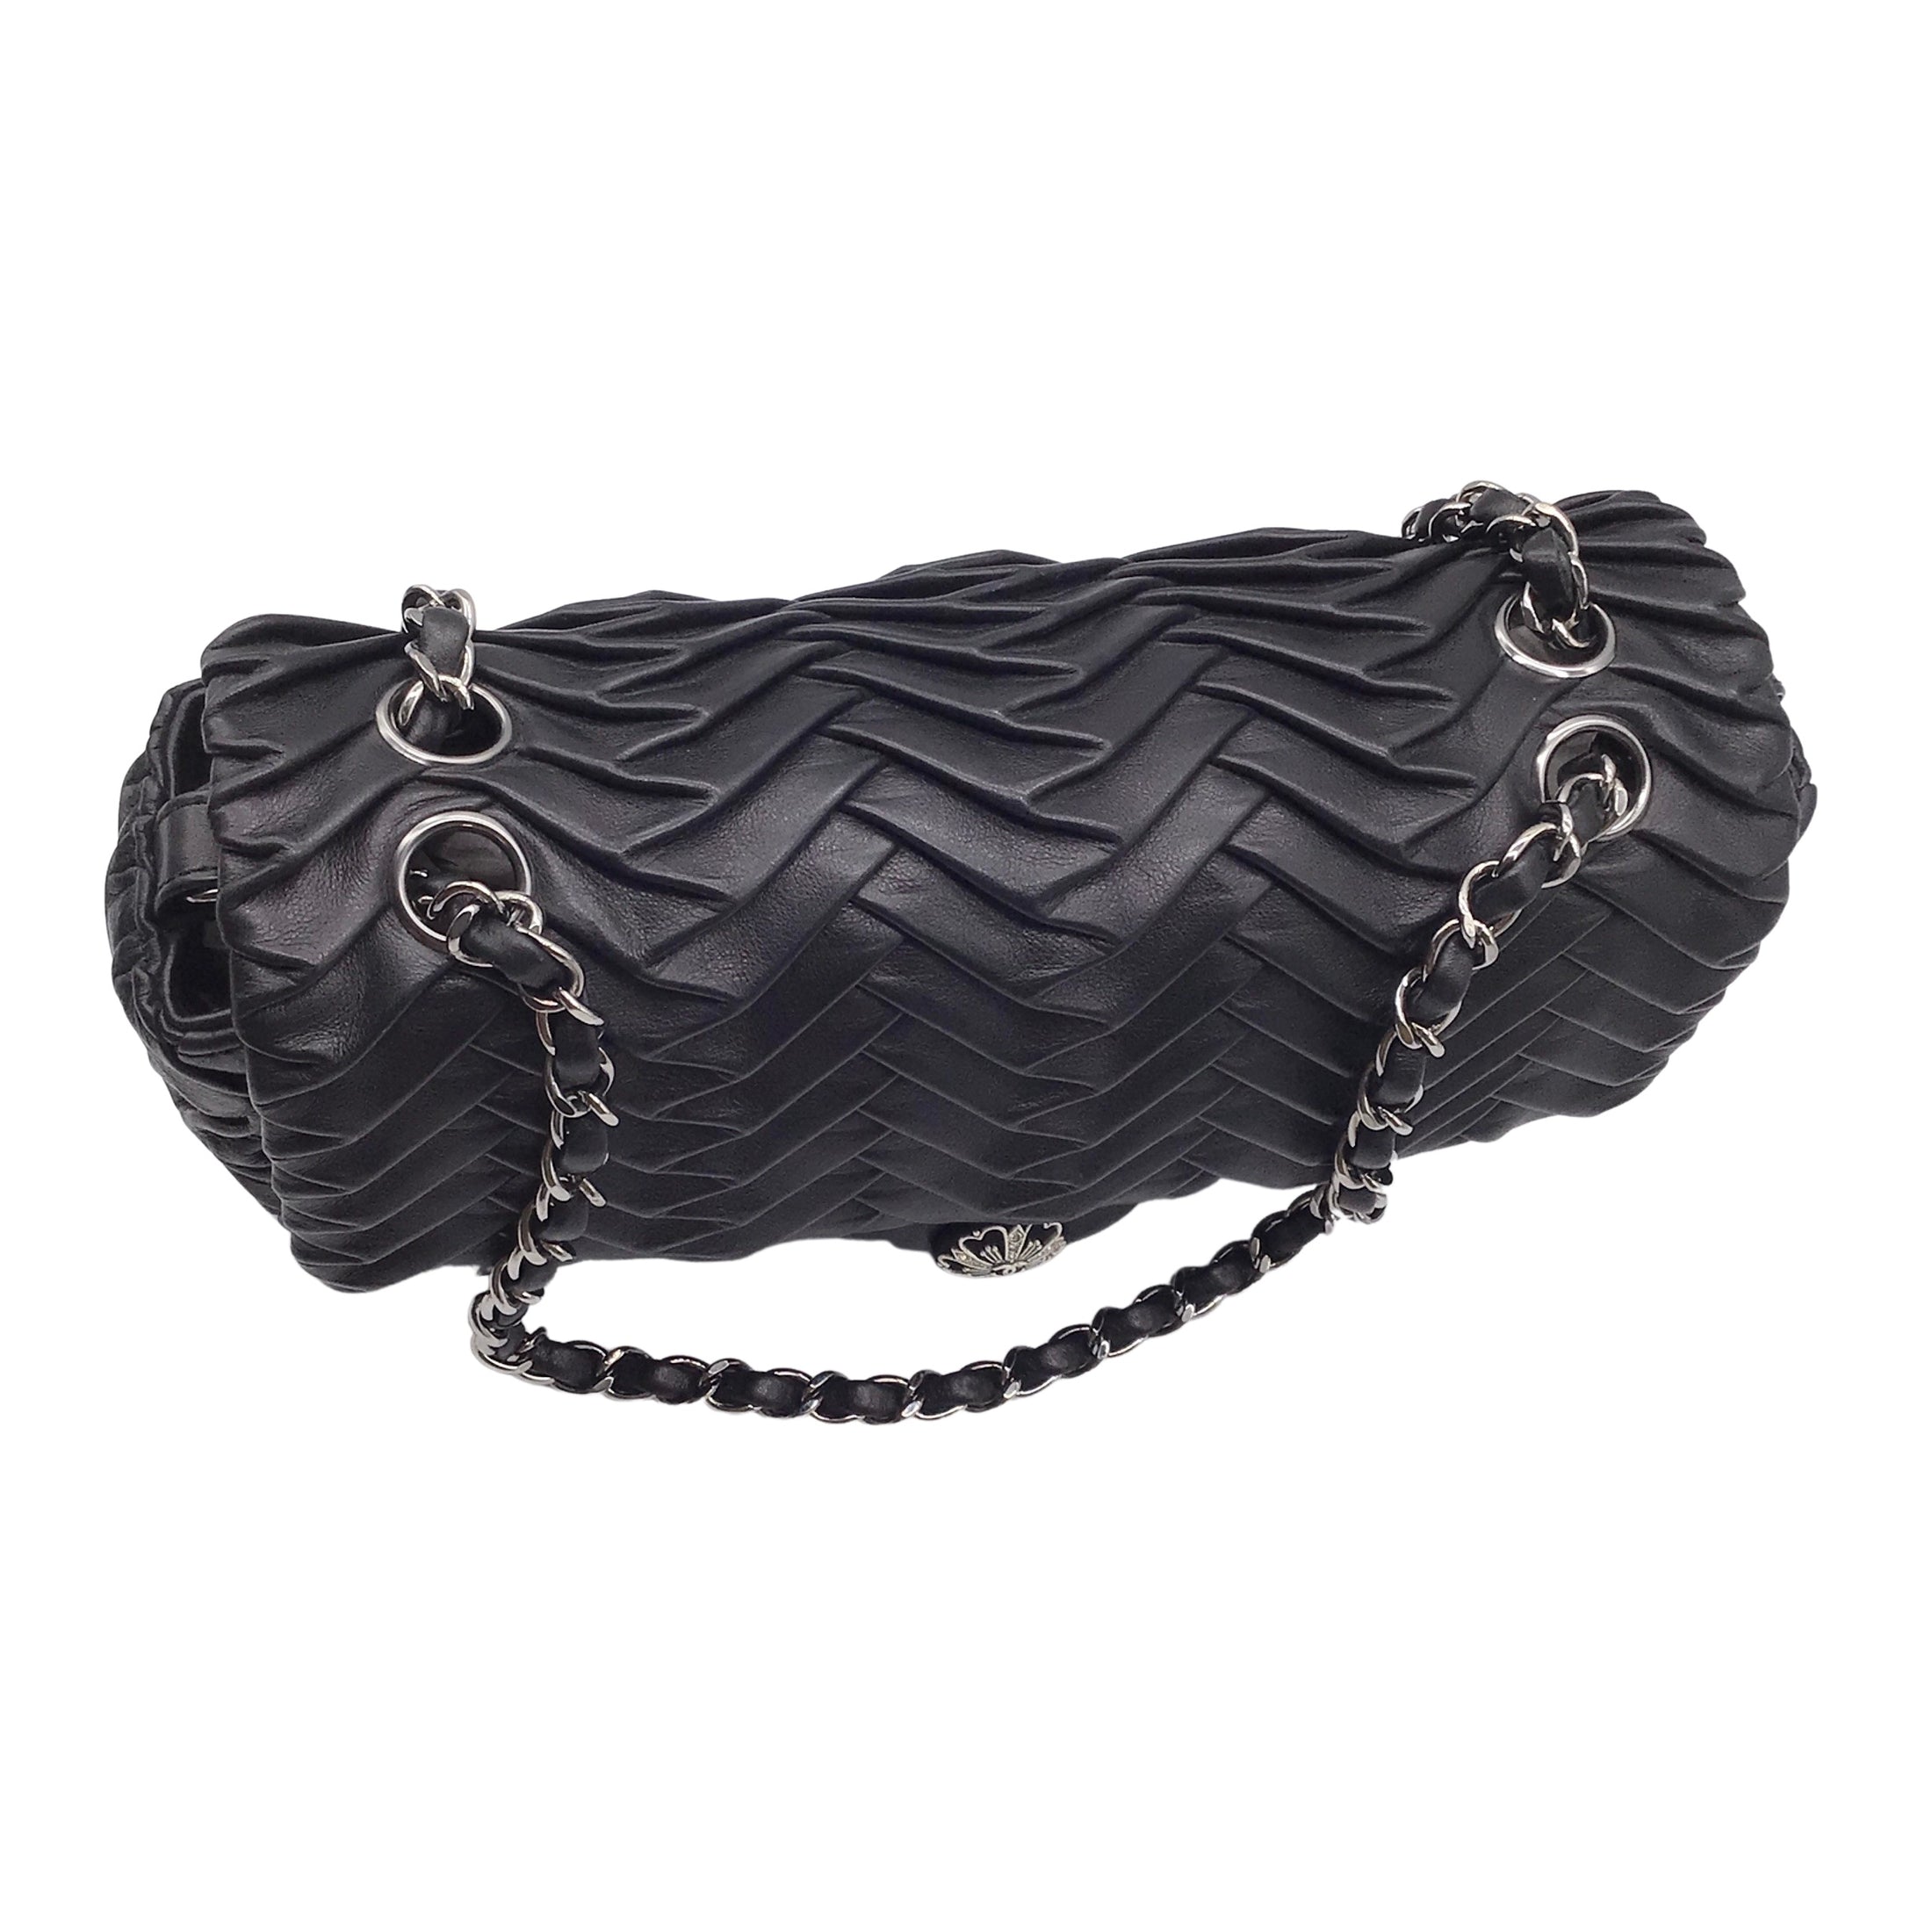 Chanel Classic Flap 2007 Pleated Black Lambskin Leather Shoulder Bag